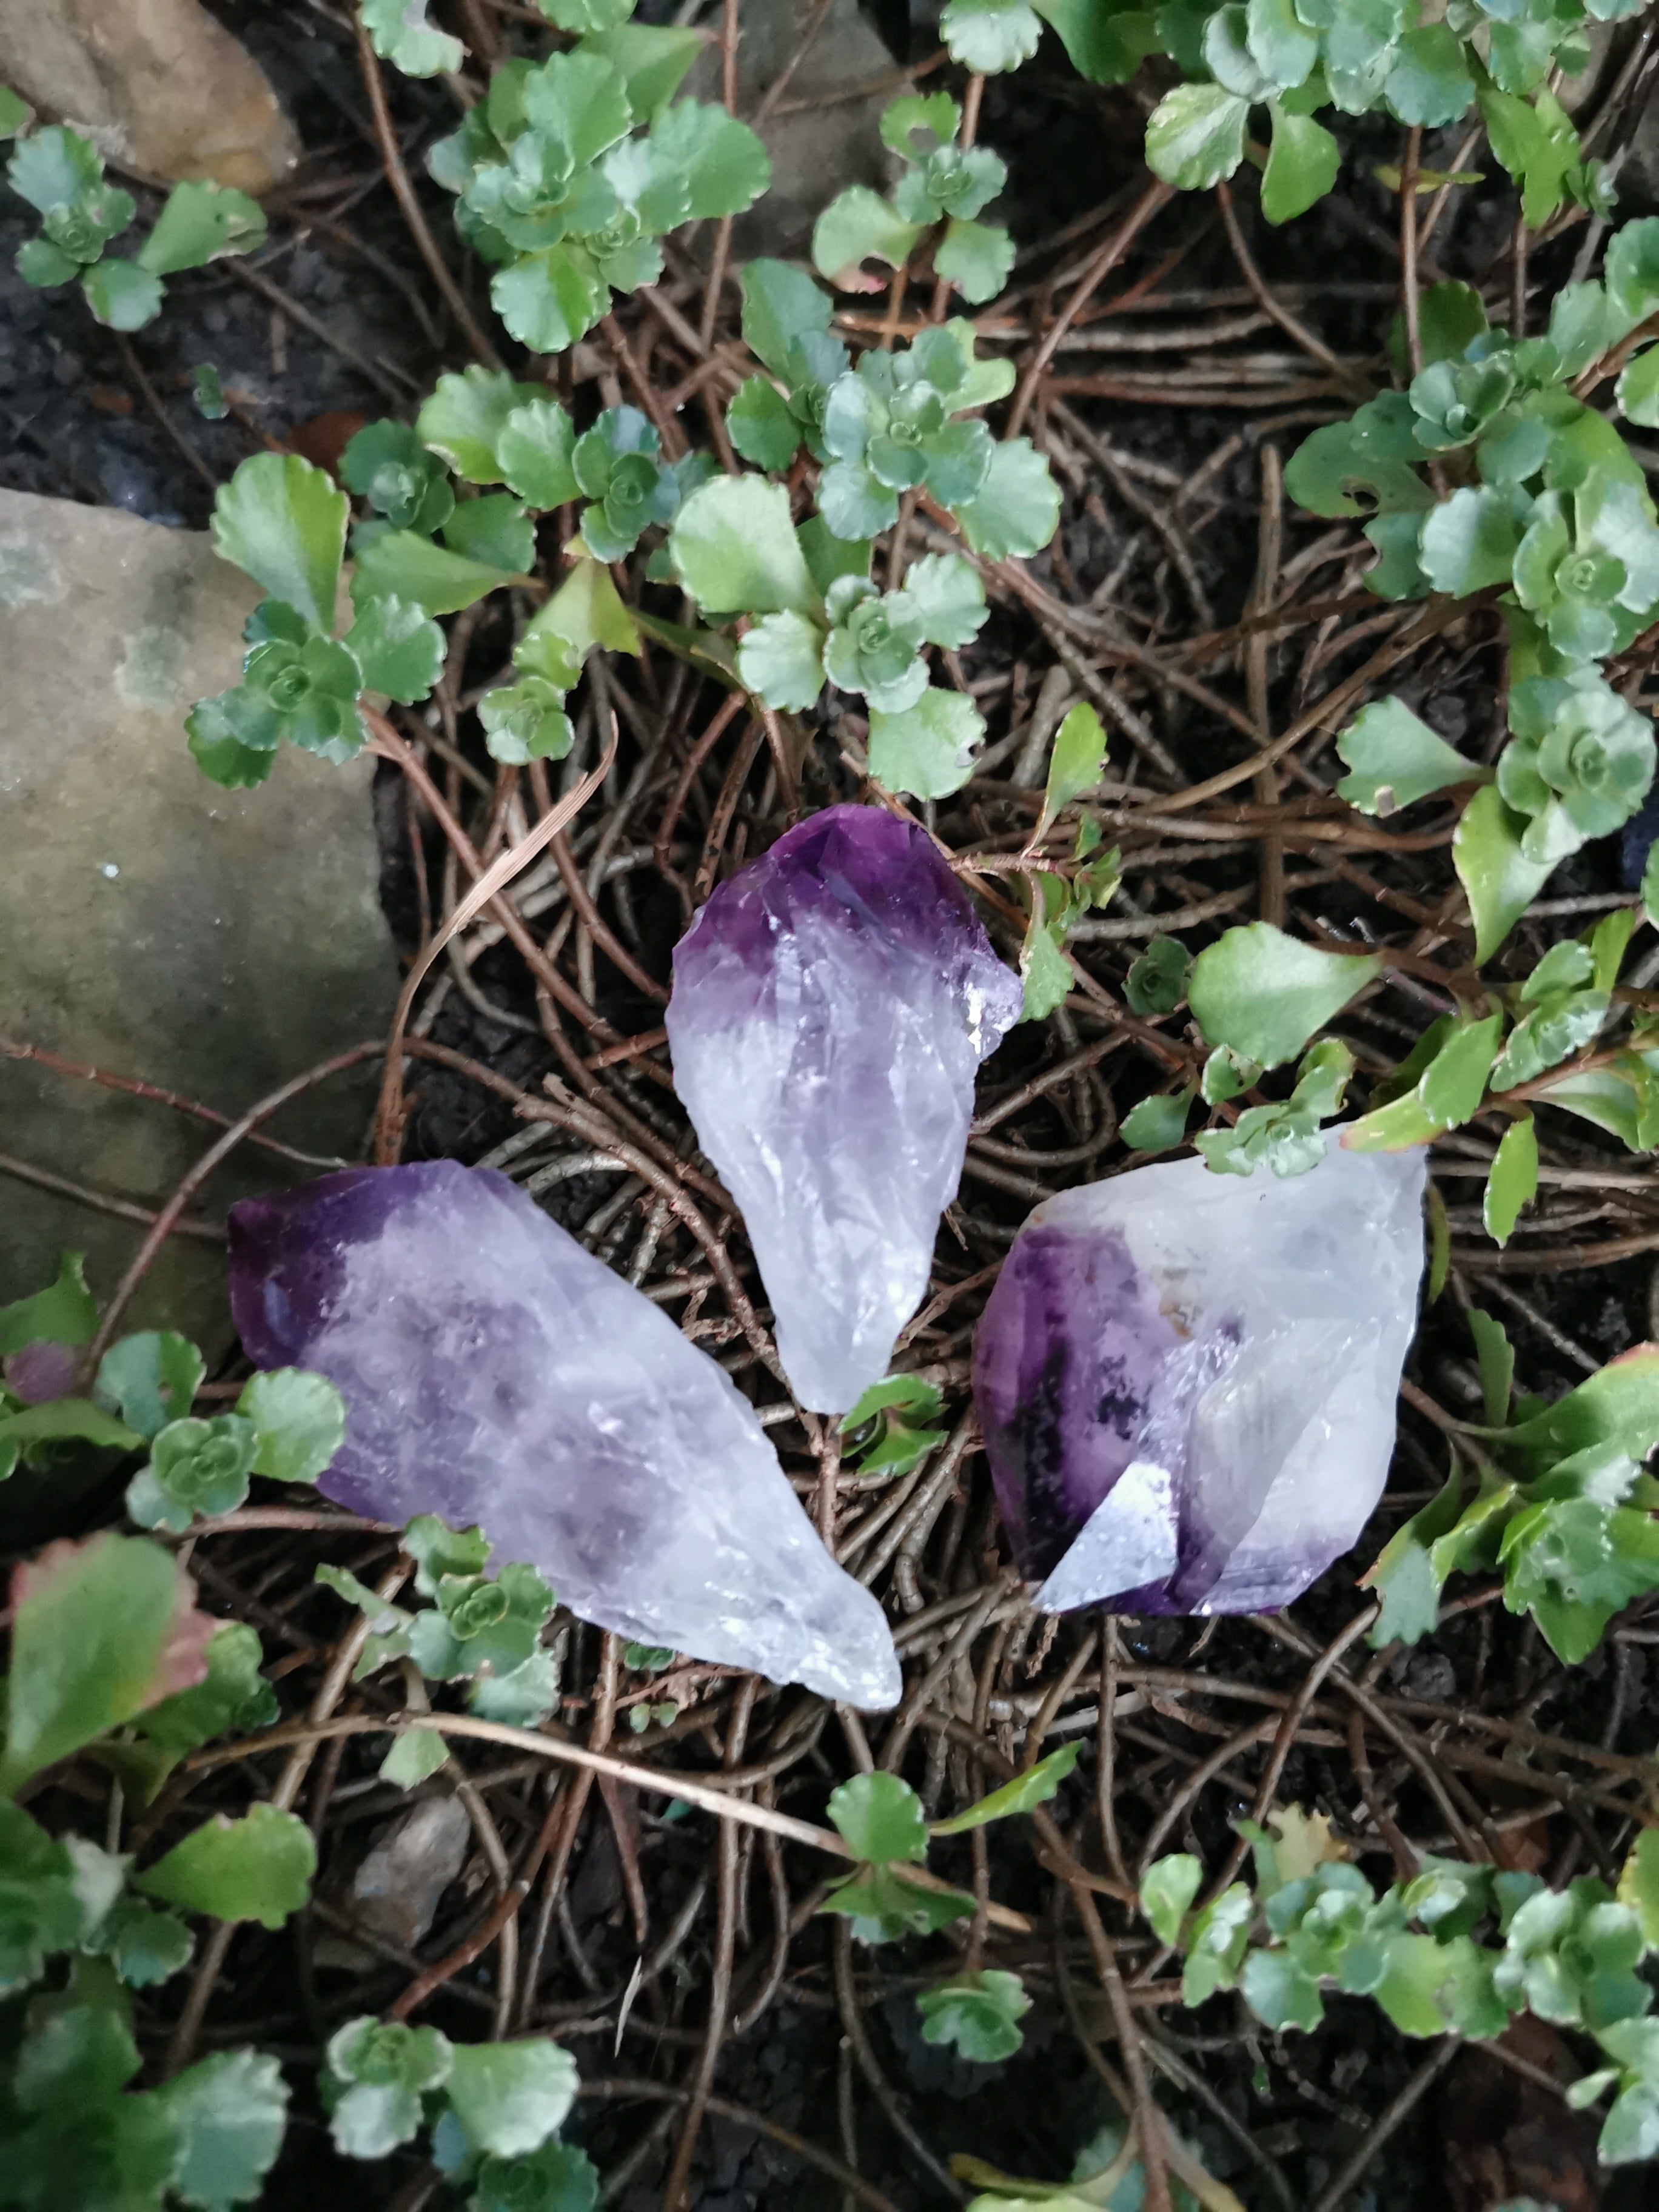 Amethyst Natural Point